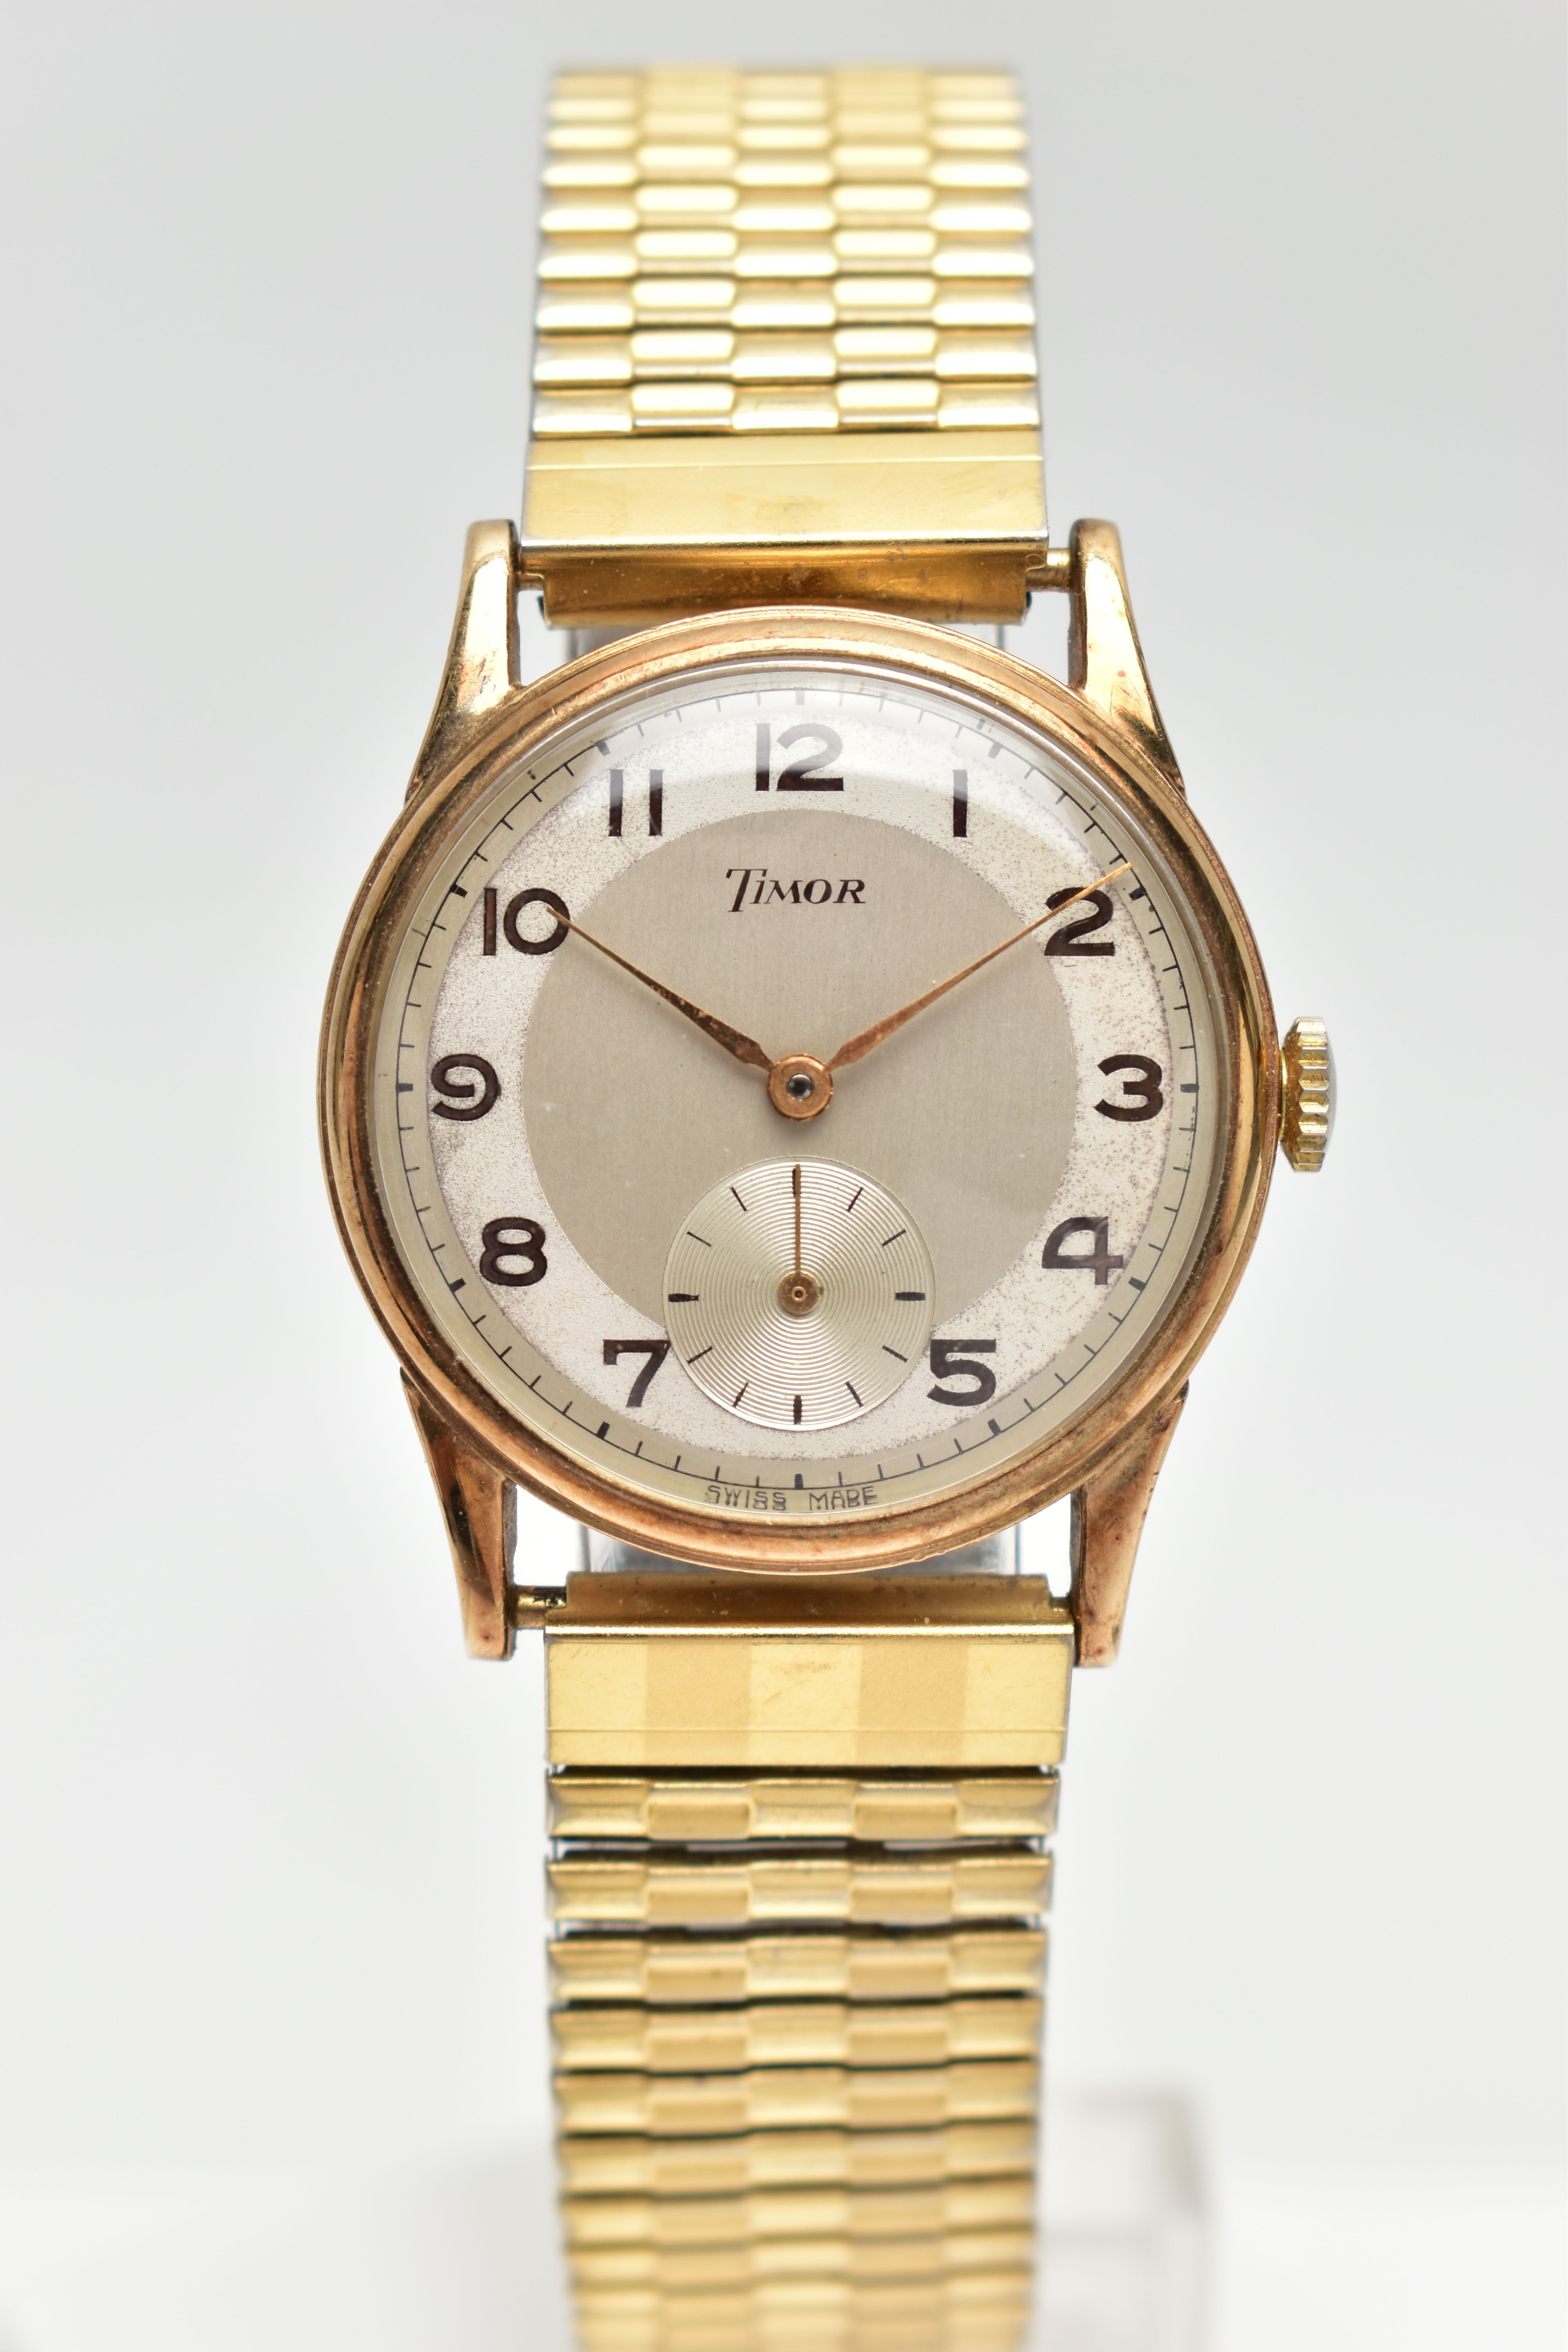 A GENTS 9CT GOLD 'TIMOR' WRISTWATCH, hand wound movement, round silver dial signed 'Timor', Arabic